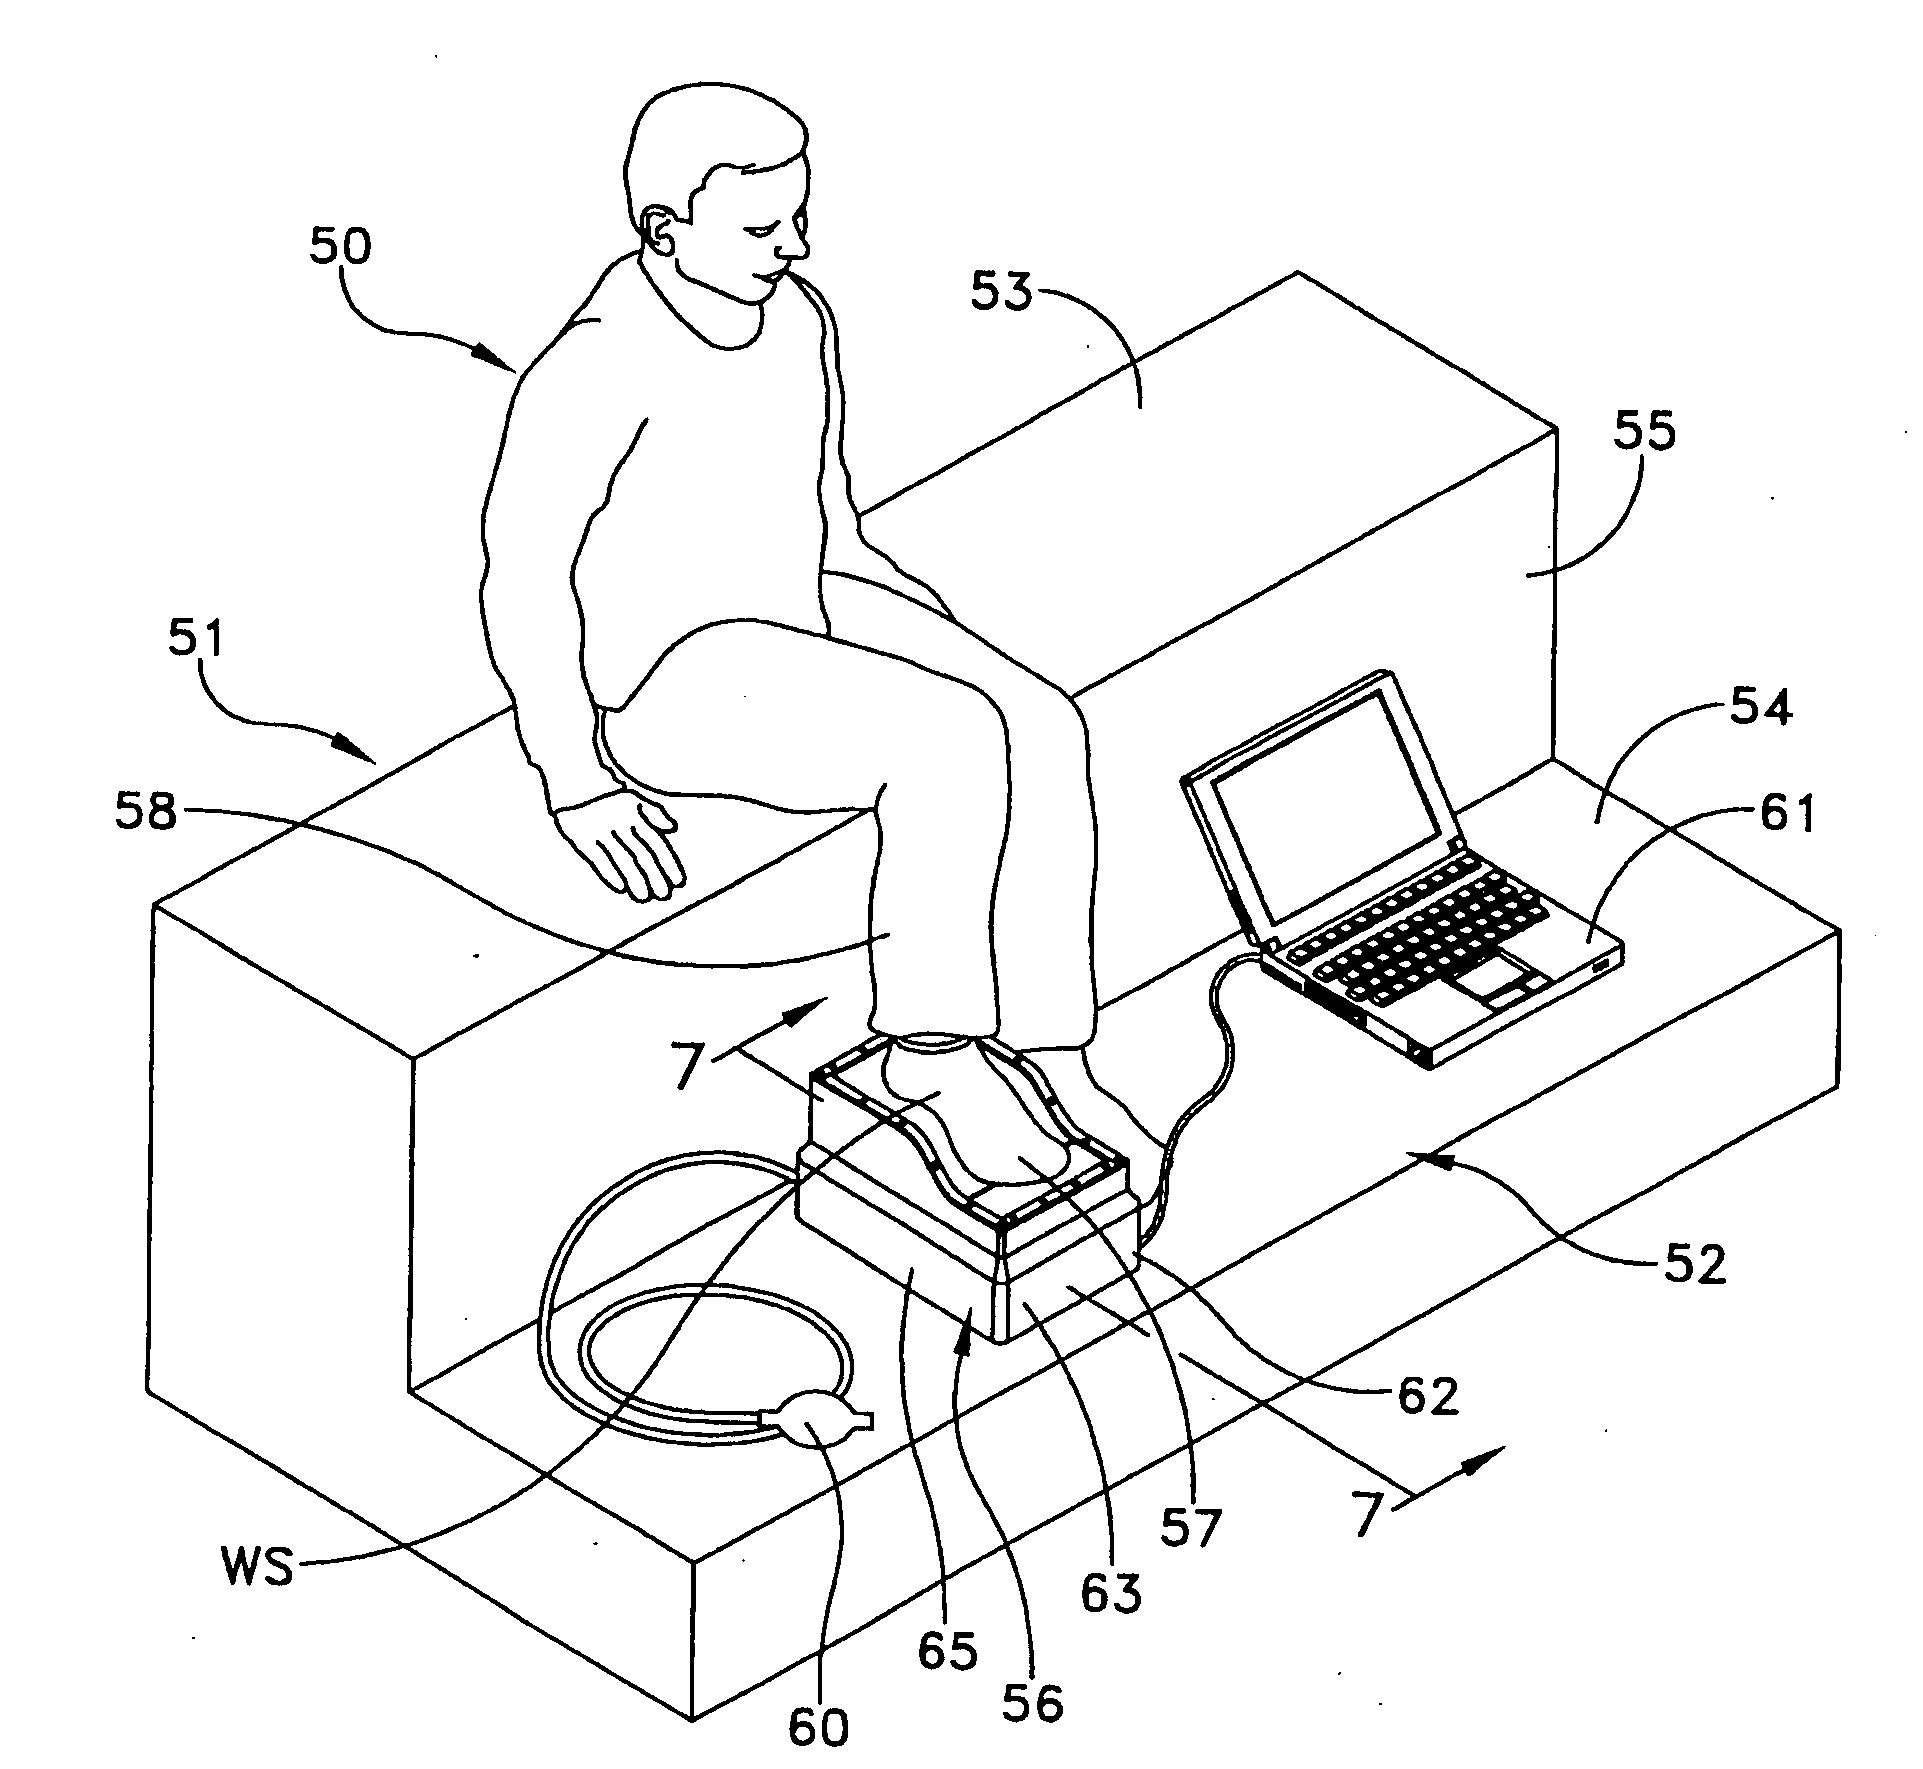 Method and apparatus for manufacturing custom orthotic footbeds